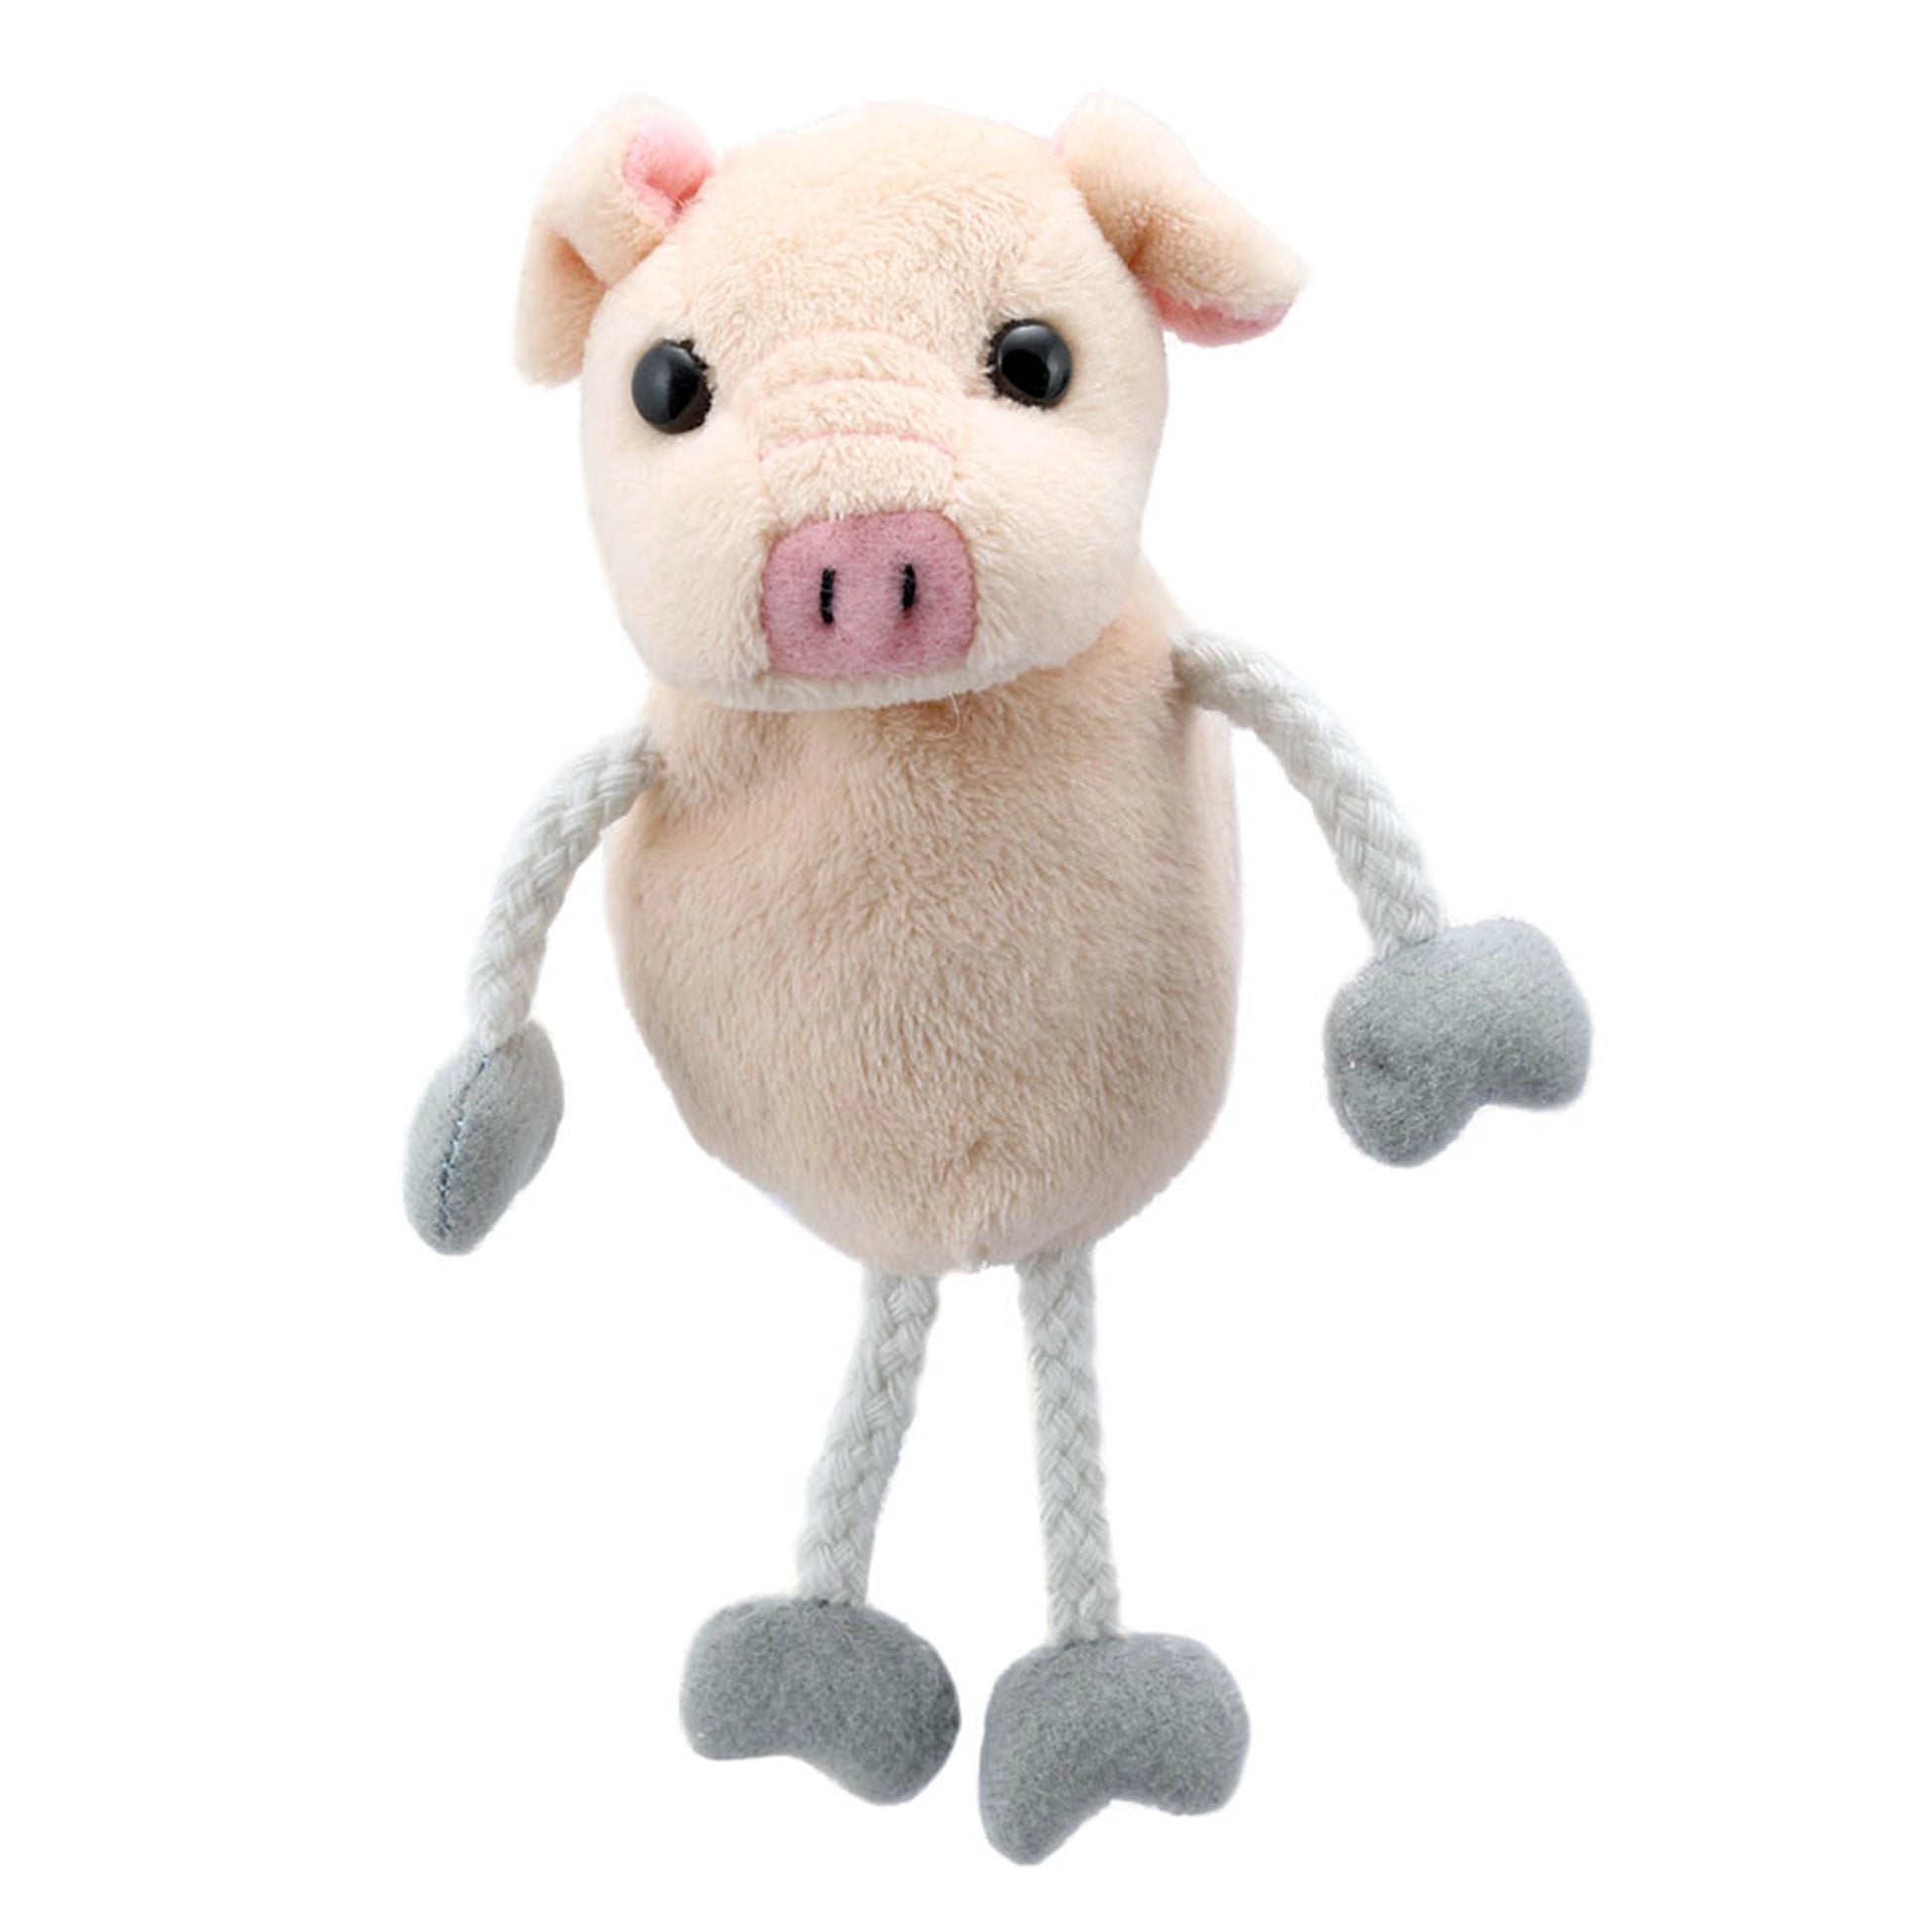 Pig Finger Puppet - The Puppet Company - The Forgotten Toy Shop